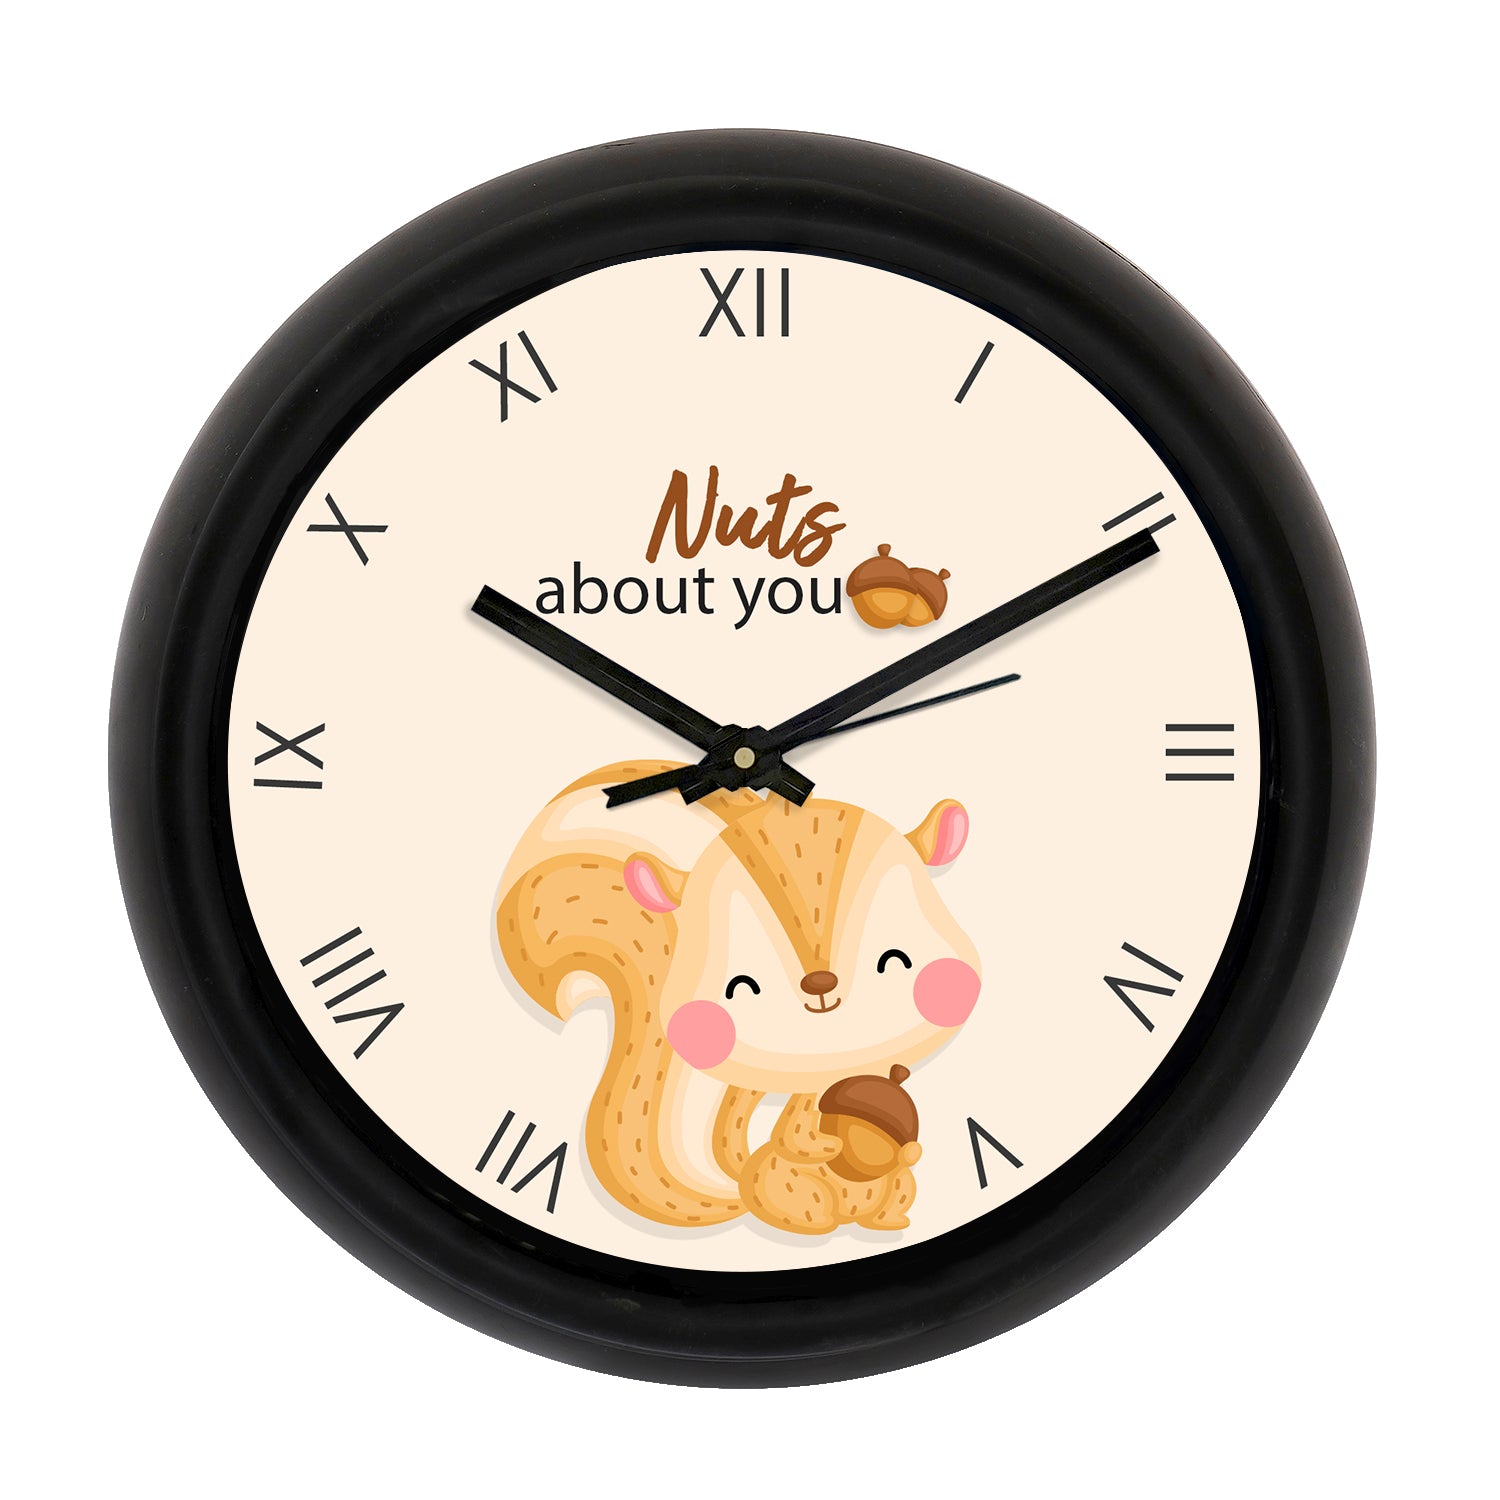 "Nuts About You" Designer Round Analog Black Wall Clock